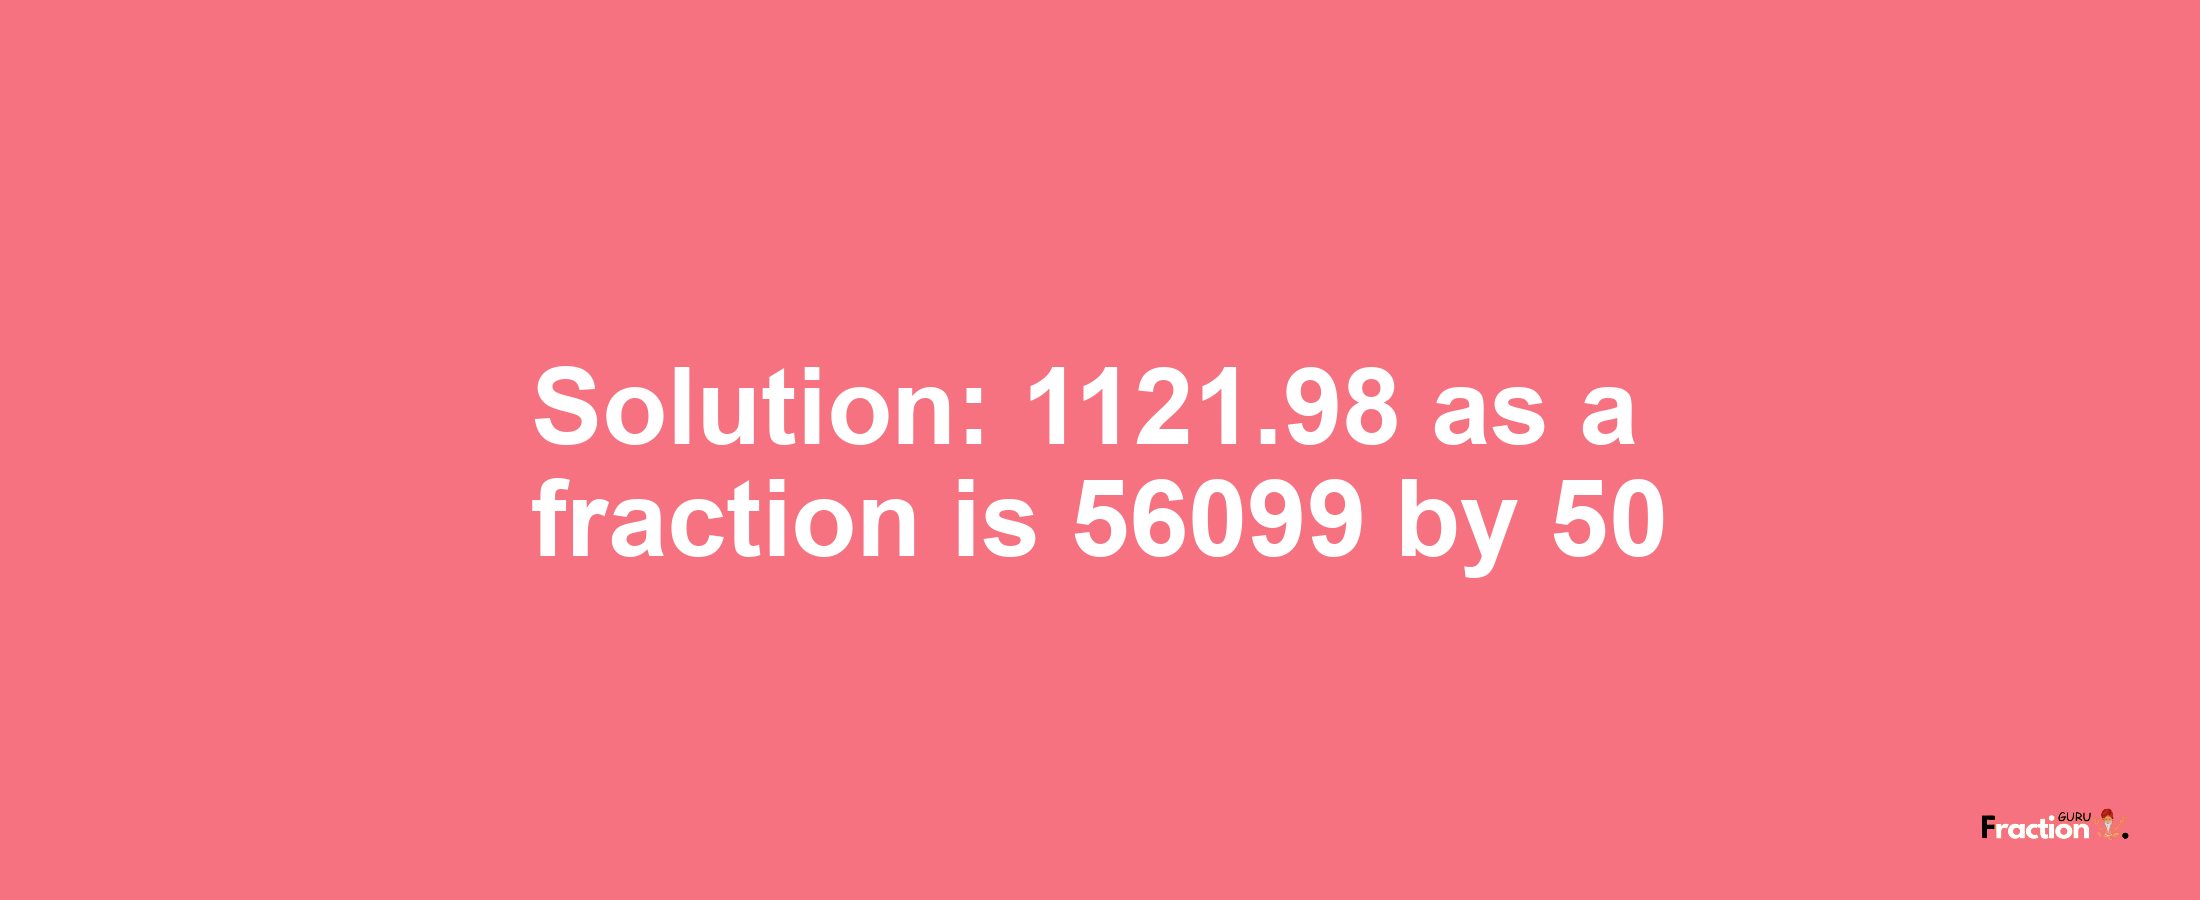 Solution:1121.98 as a fraction is 56099/50